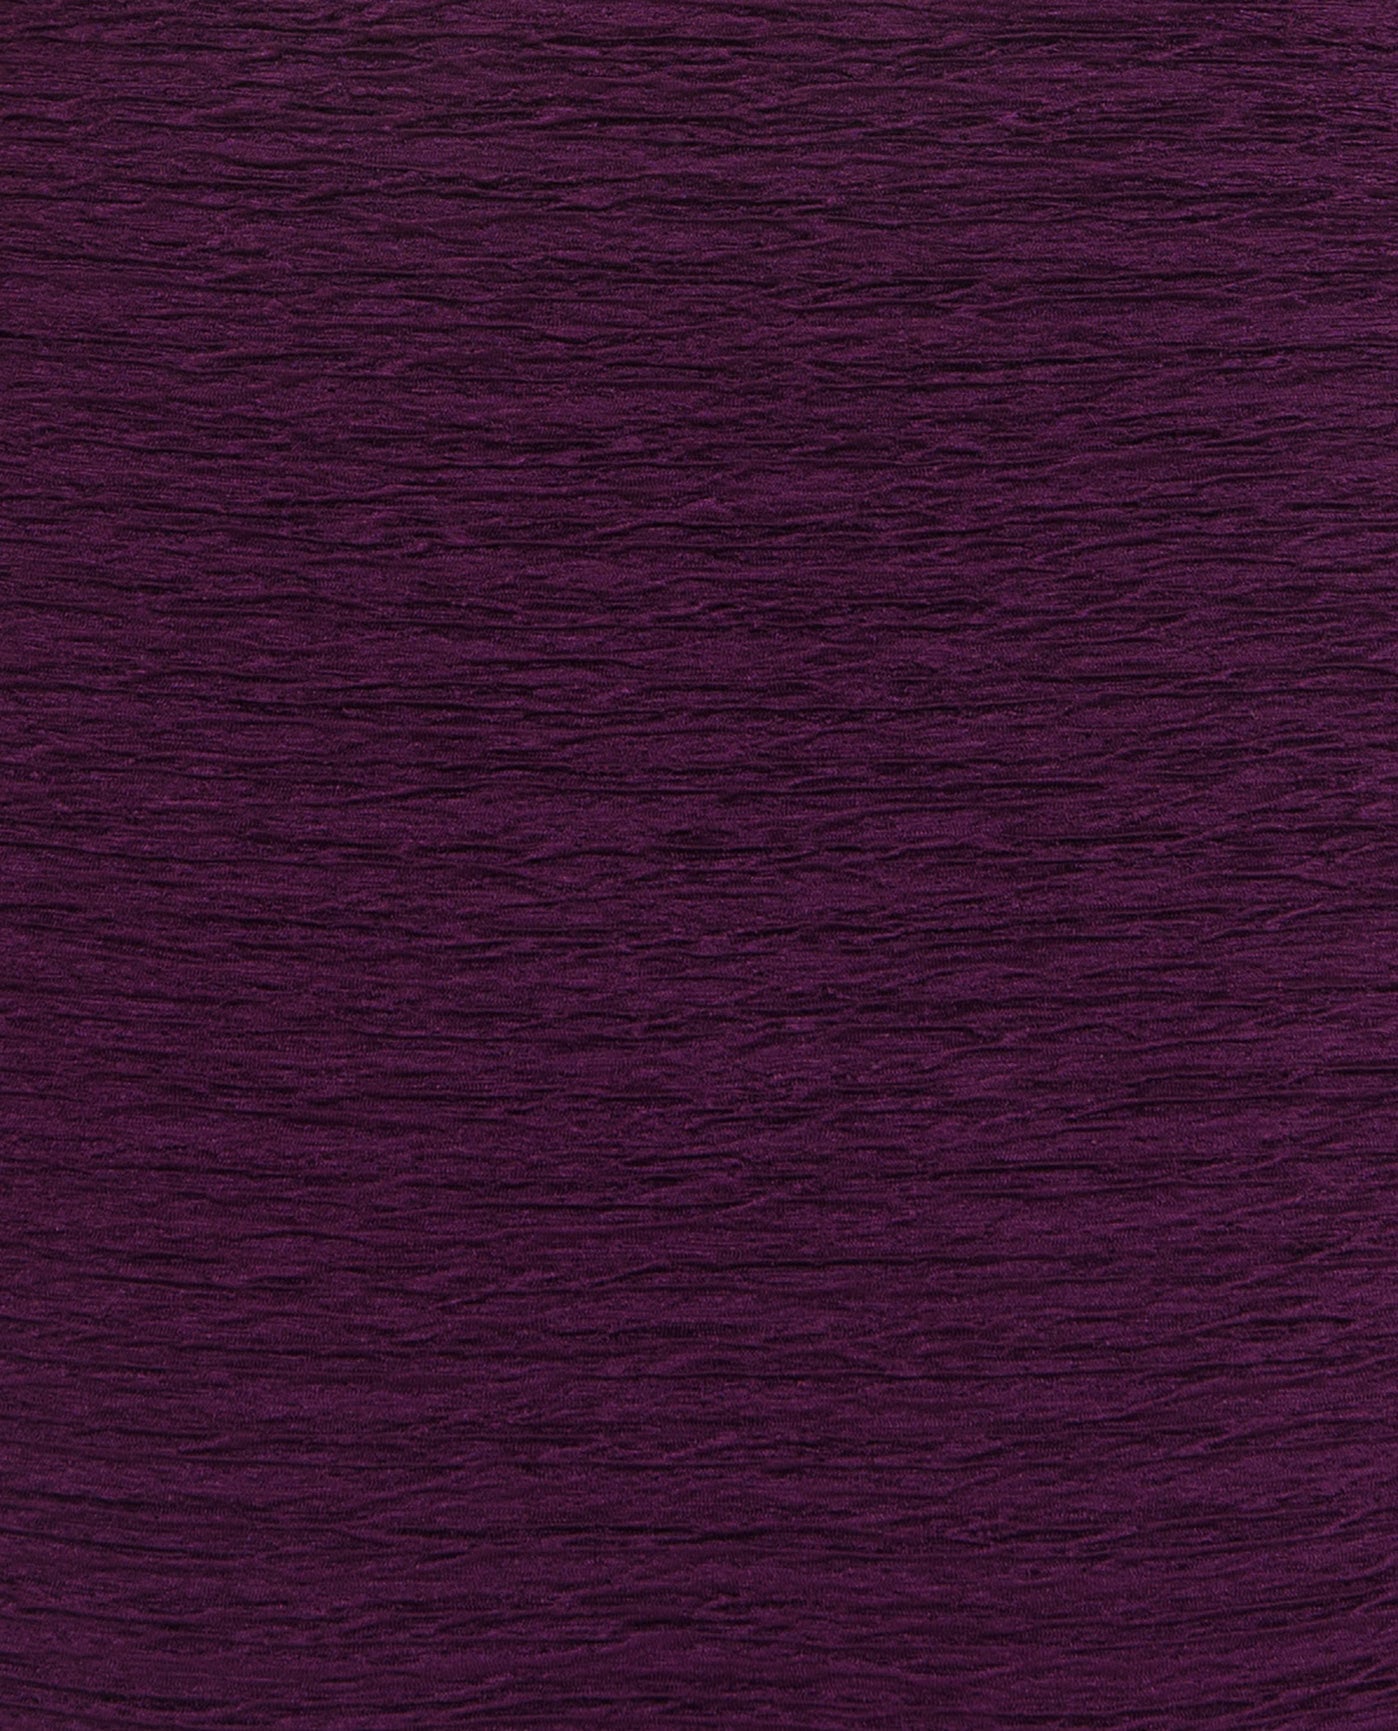 FABRIC SWATCH VIEW OF CHLORINE RESISTANT KRINKLE TEXTURED SOLID ACTIVE BACK ONE PIECE | KRINKLE EGGPLANT